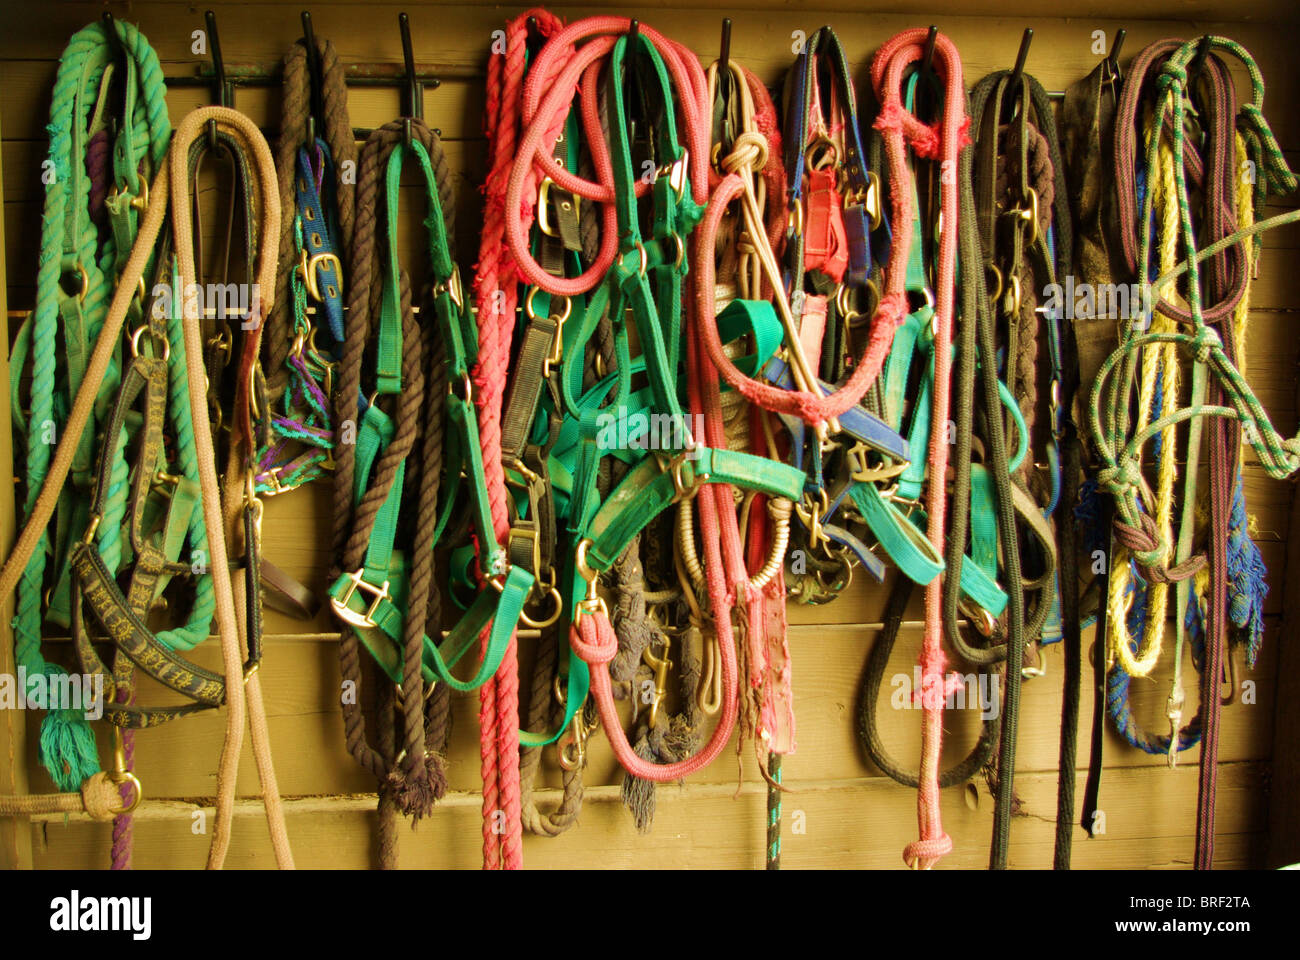 Multi-colored horse halters hanging on tack room wall. Stock Photo